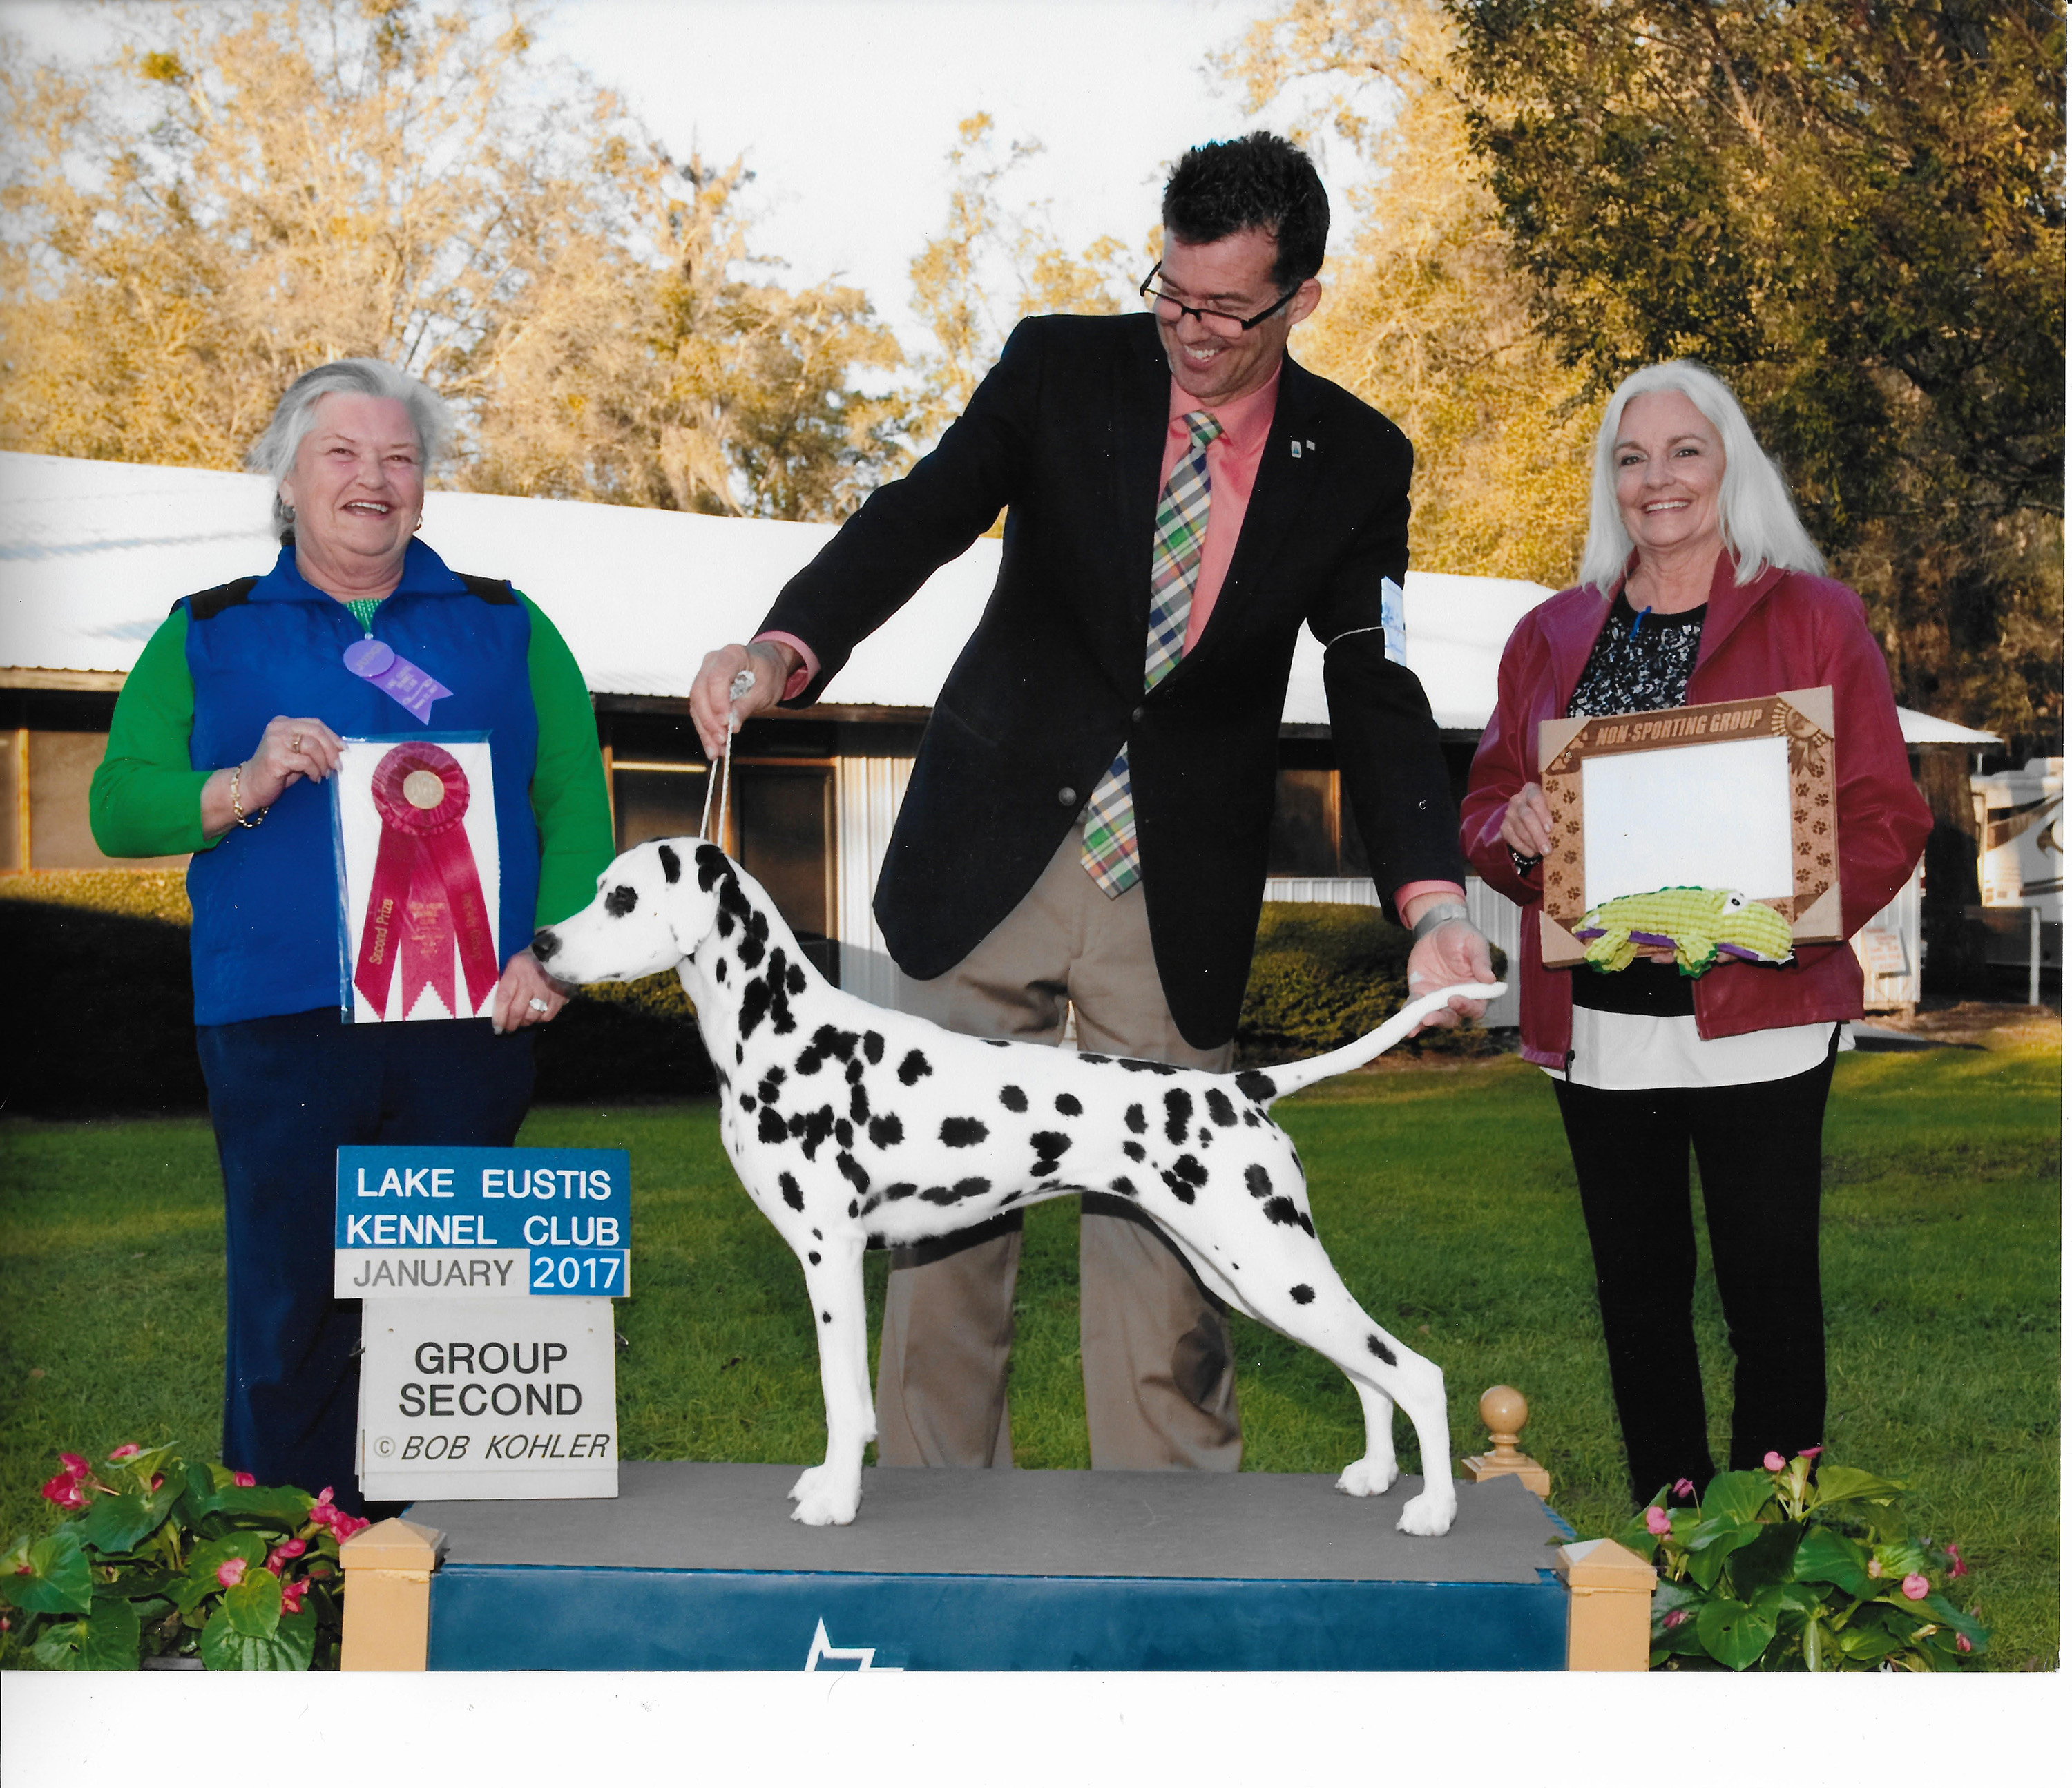 Locally owned Dalmatian wins Best of Breed at Westminster - The Blade